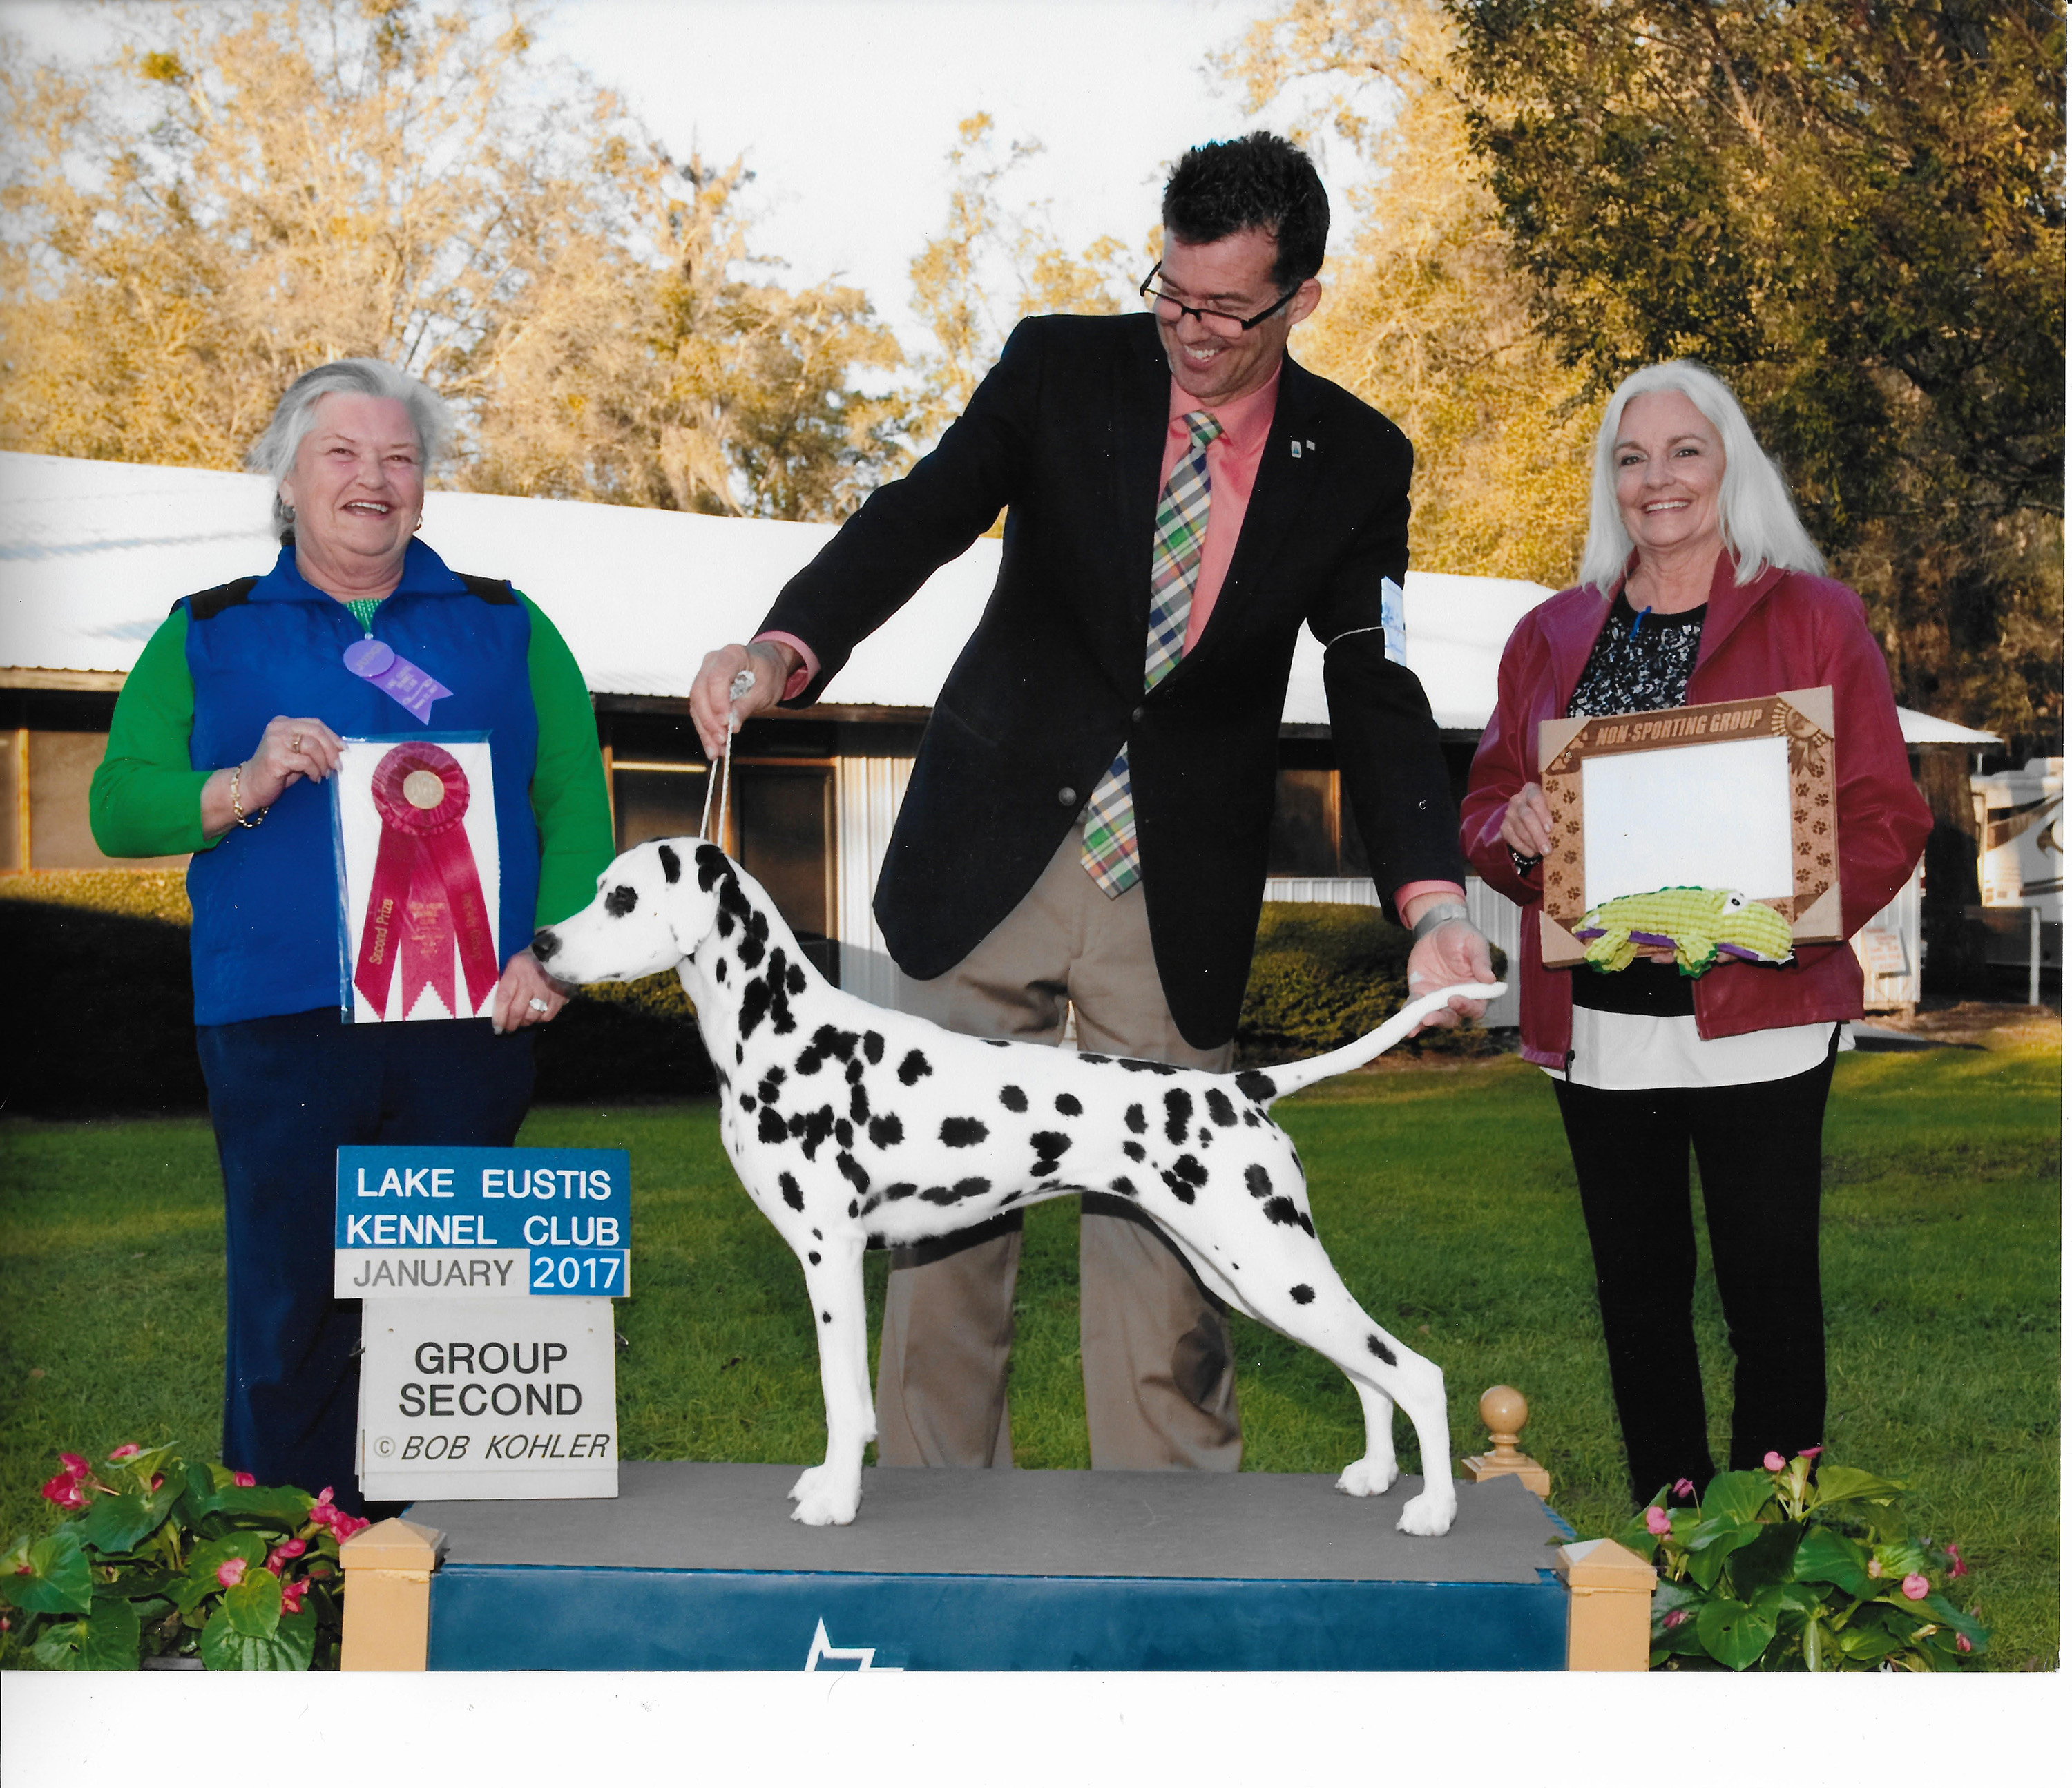 Locally owned Dalmatian wins Best of Breed at Westminster - The Blade